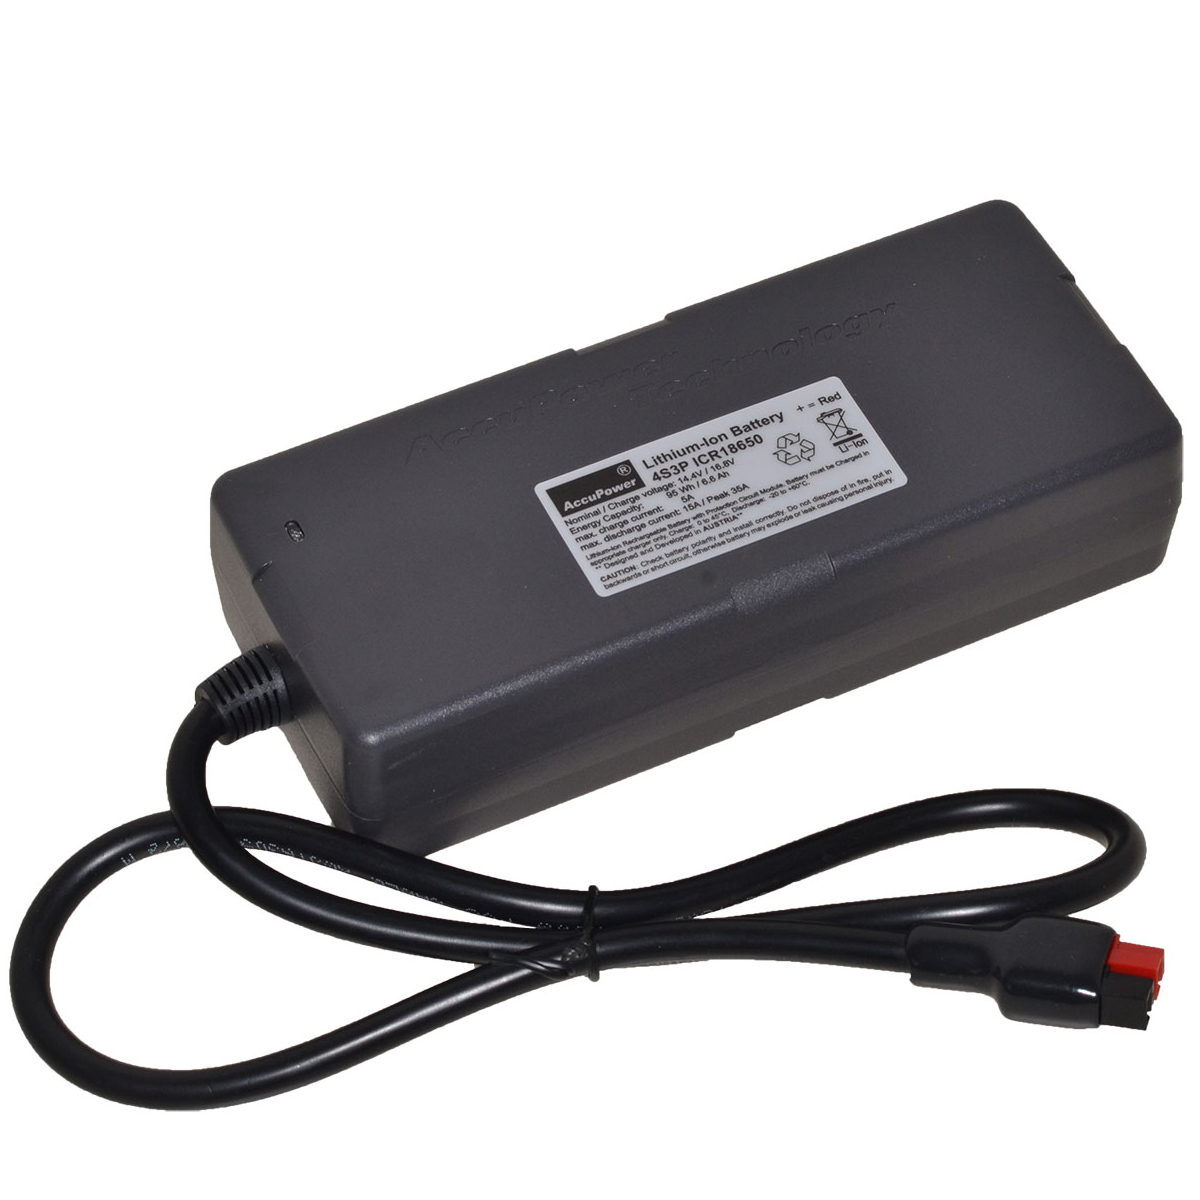 AccuPower lithium battery pack 4S3P 14,4V 6,6Ah 95Wh in housing with cable